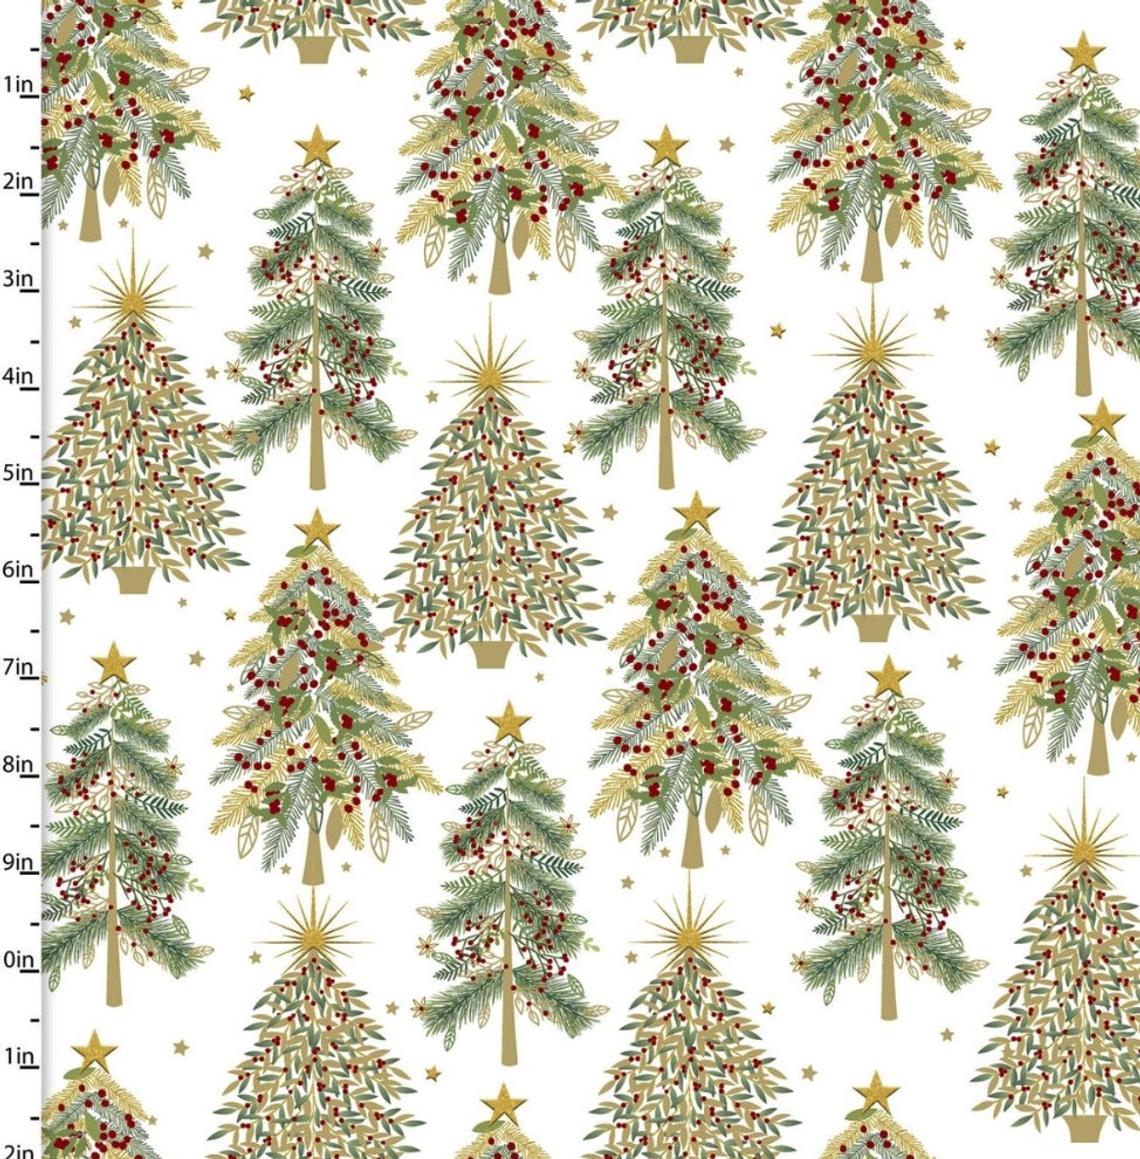 Shimmer and Sparkle - Trees White from 3 Wishes Fabric  100% Cotton Fabric. Machine Wash Cold. Dry Low. Great for quilting and other cotton print projects.